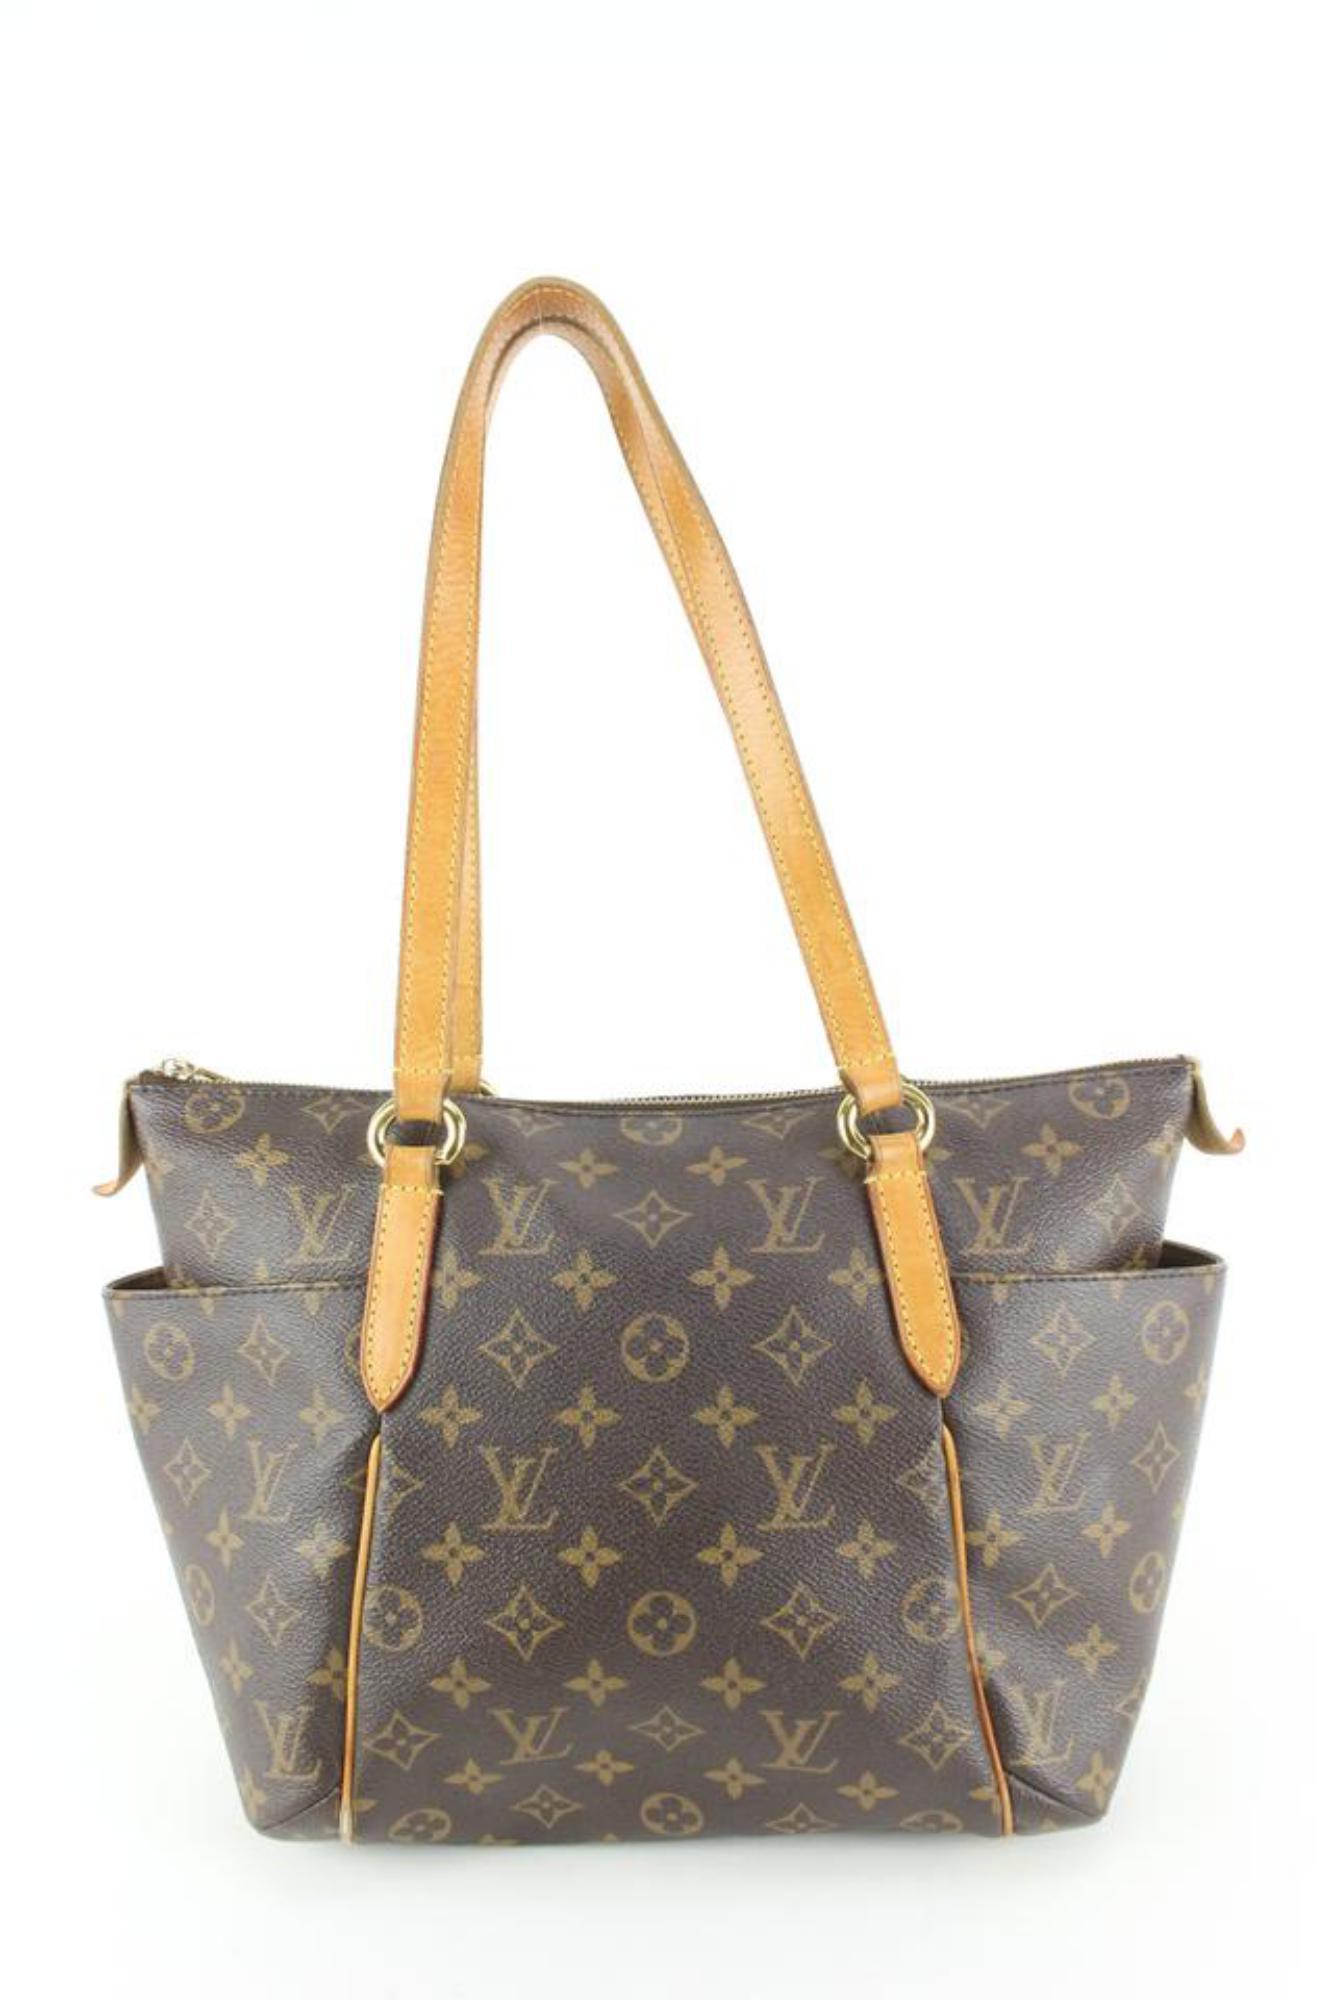 Louis Vuitton Monogram Totally Zip Tote Shoulder Bag 89lz56s In Good Condition In Dix hills, NY